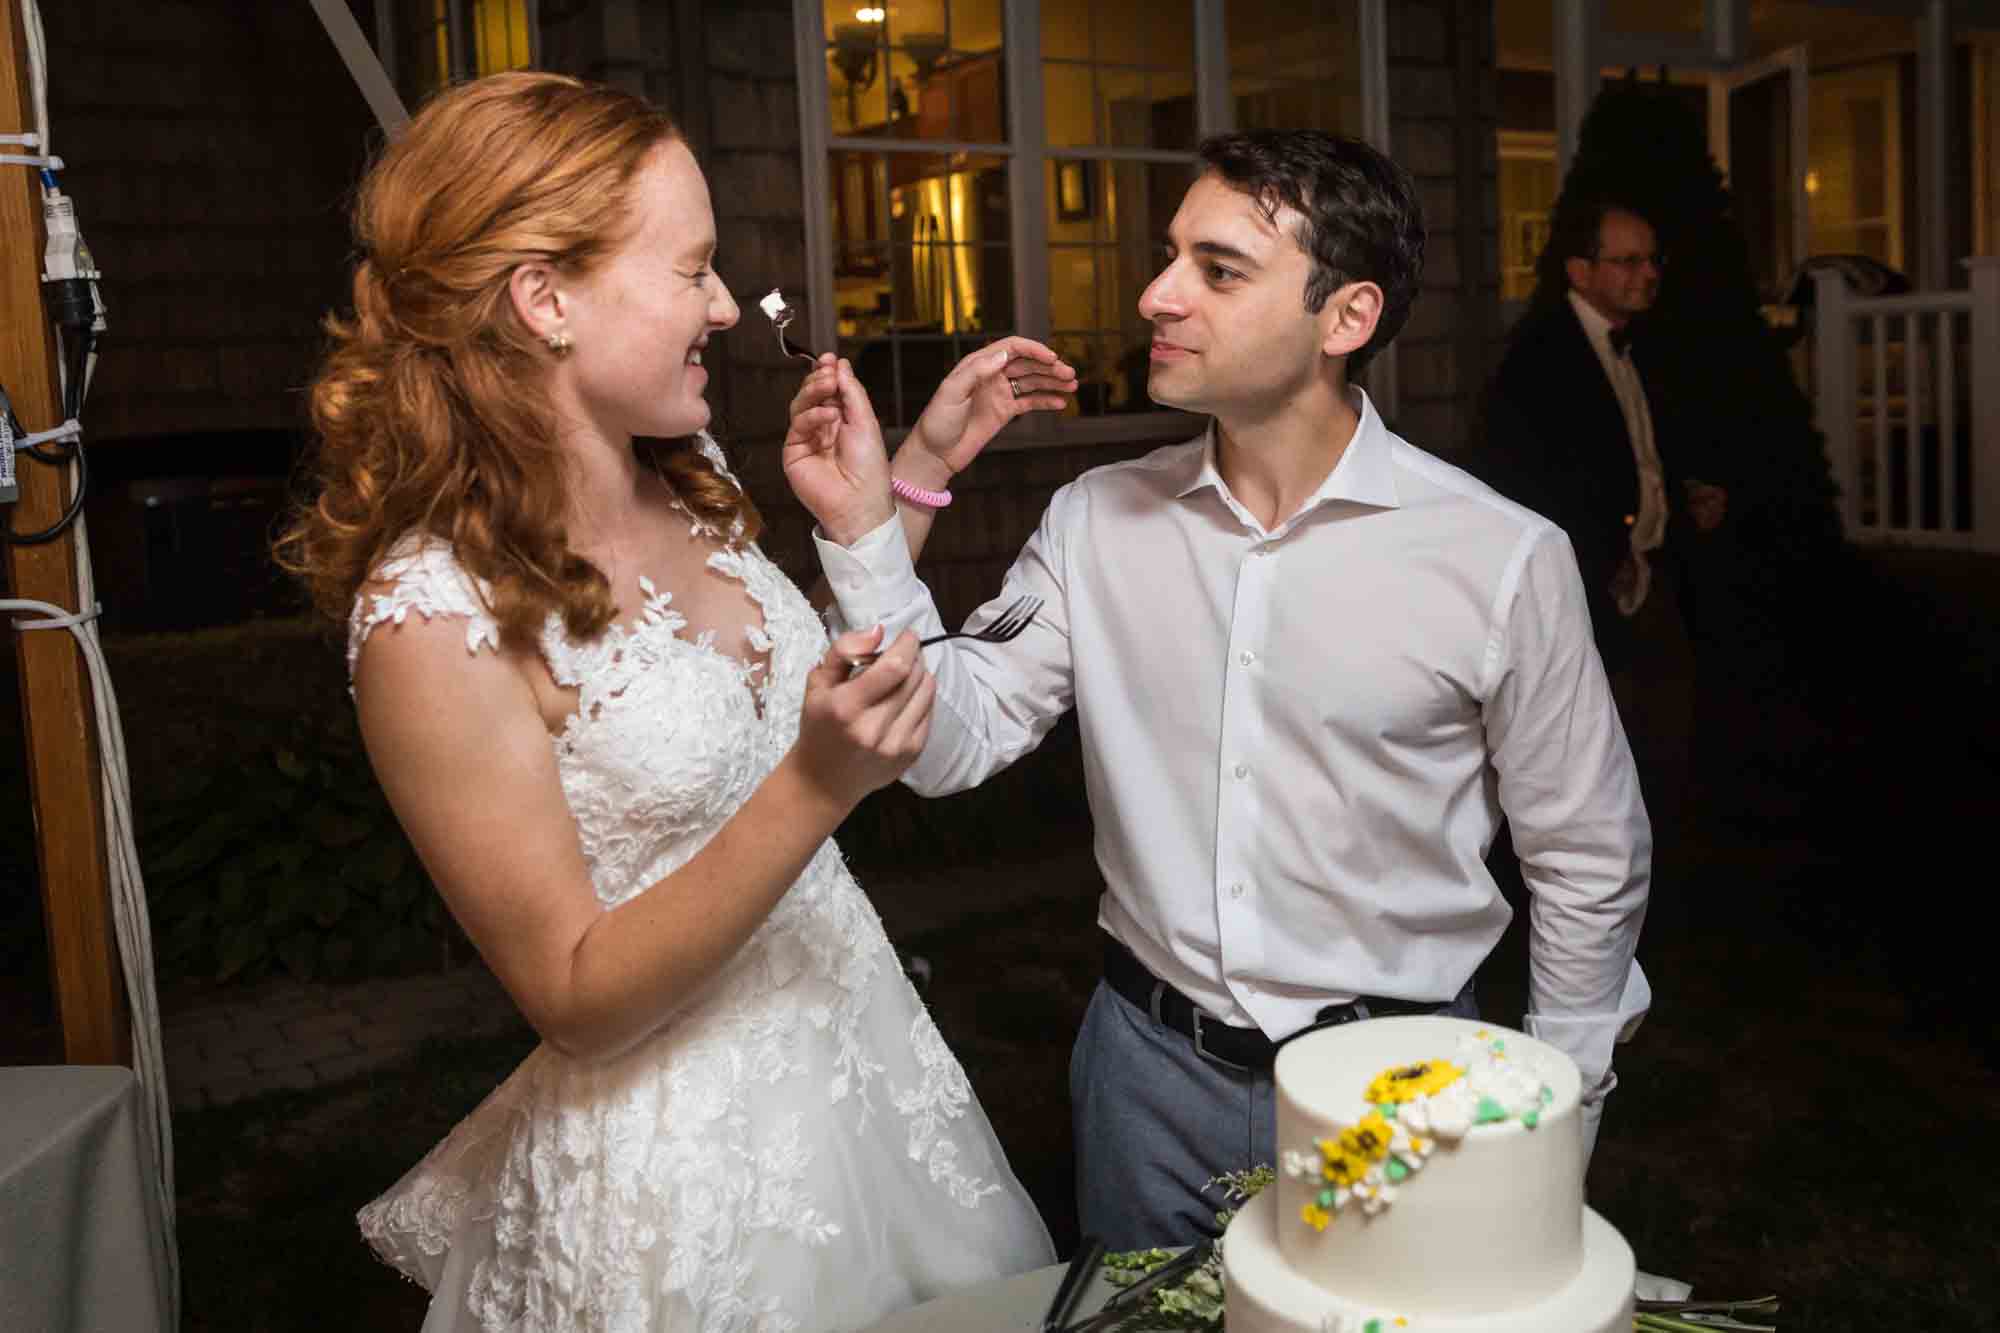 Bride and groom playing during cake cutting for an article on backyard wedding tips